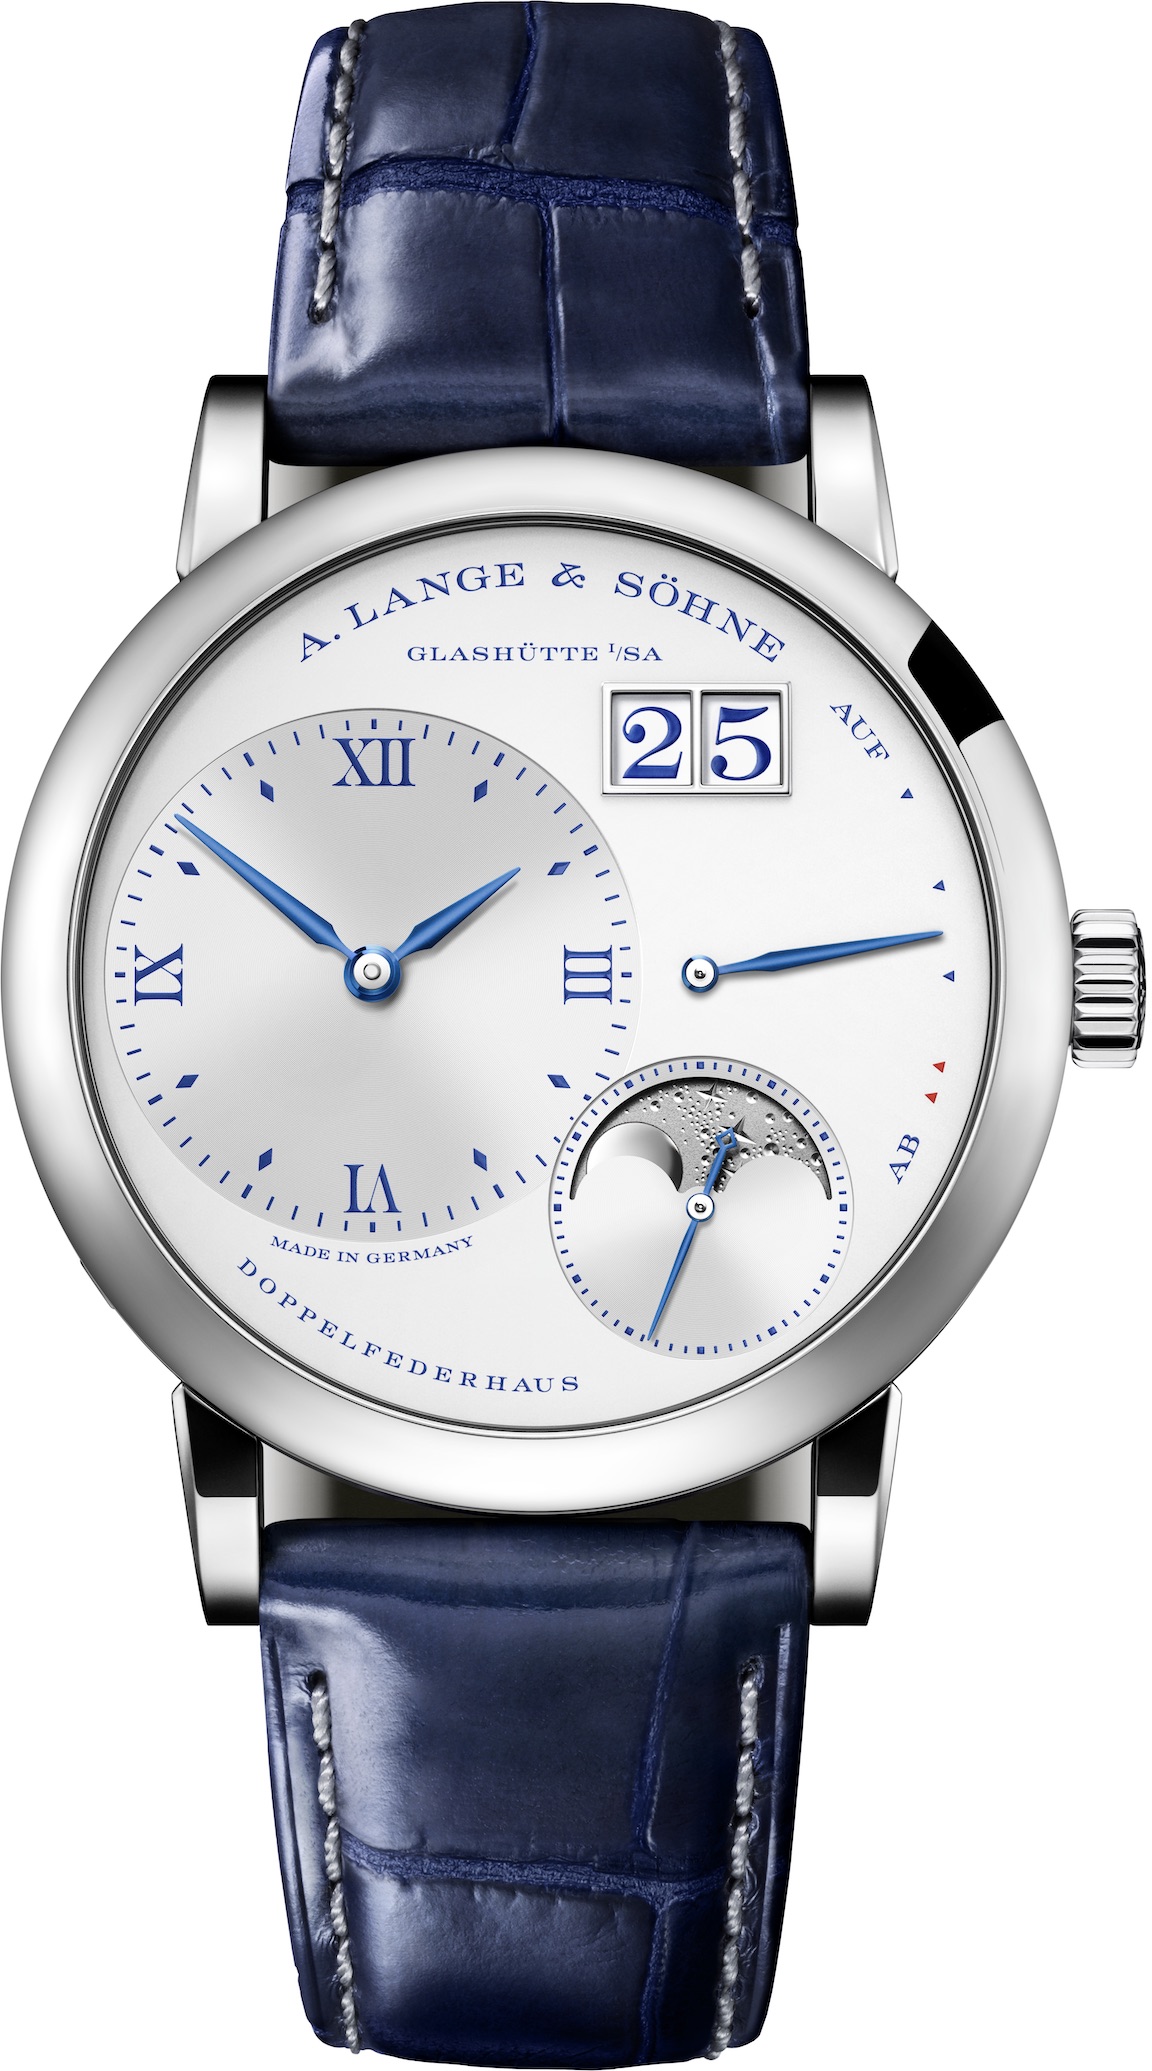 A. Lange & Sohne Little Lange 1 Moon Phase 25th Anniversary Watch. 